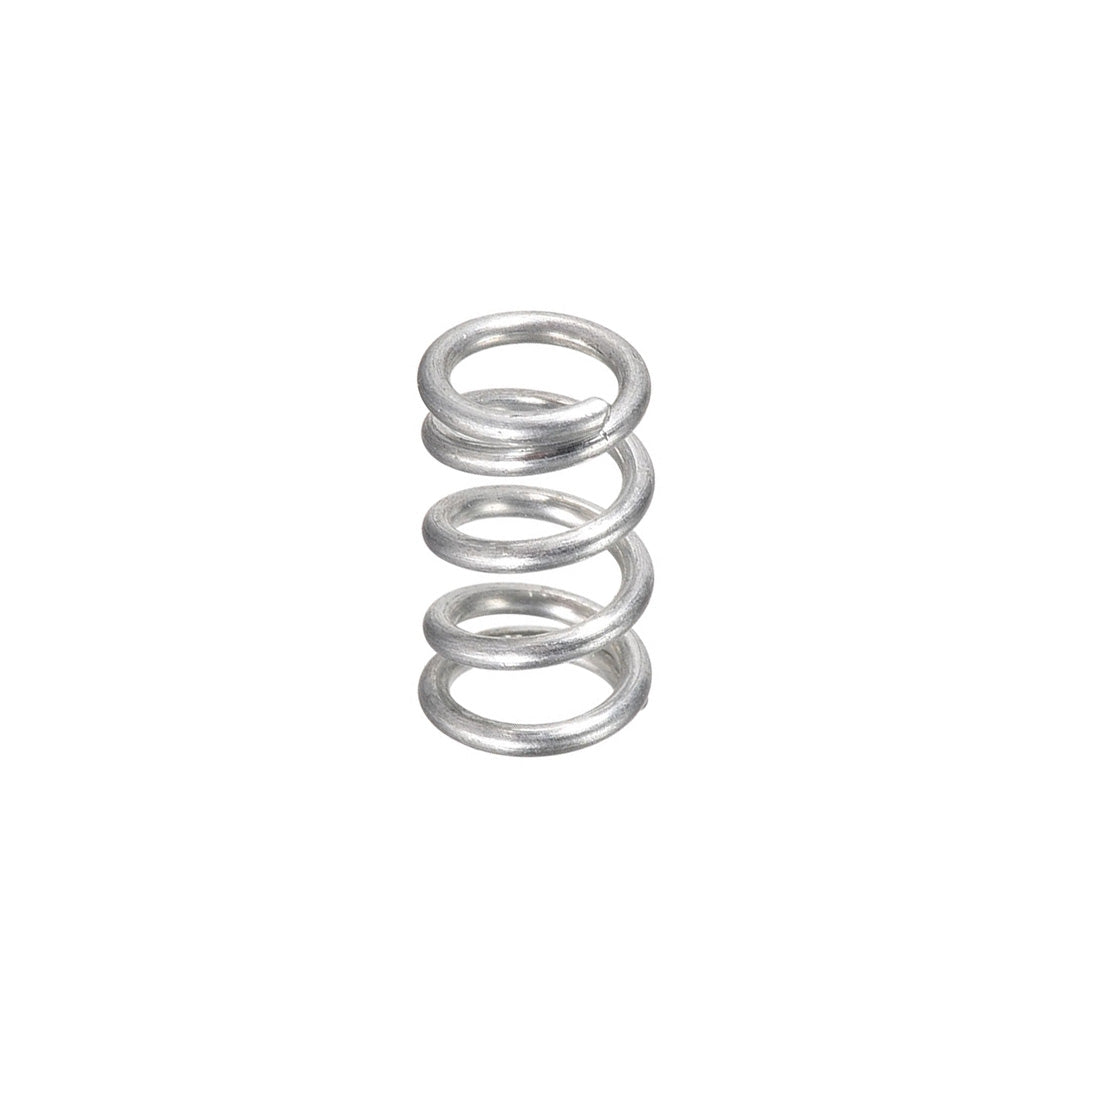 uxcell Uxcell Heated Bed Springs for 3D Printer Extruder Compression Spring, 7 x 12mm 30pcs